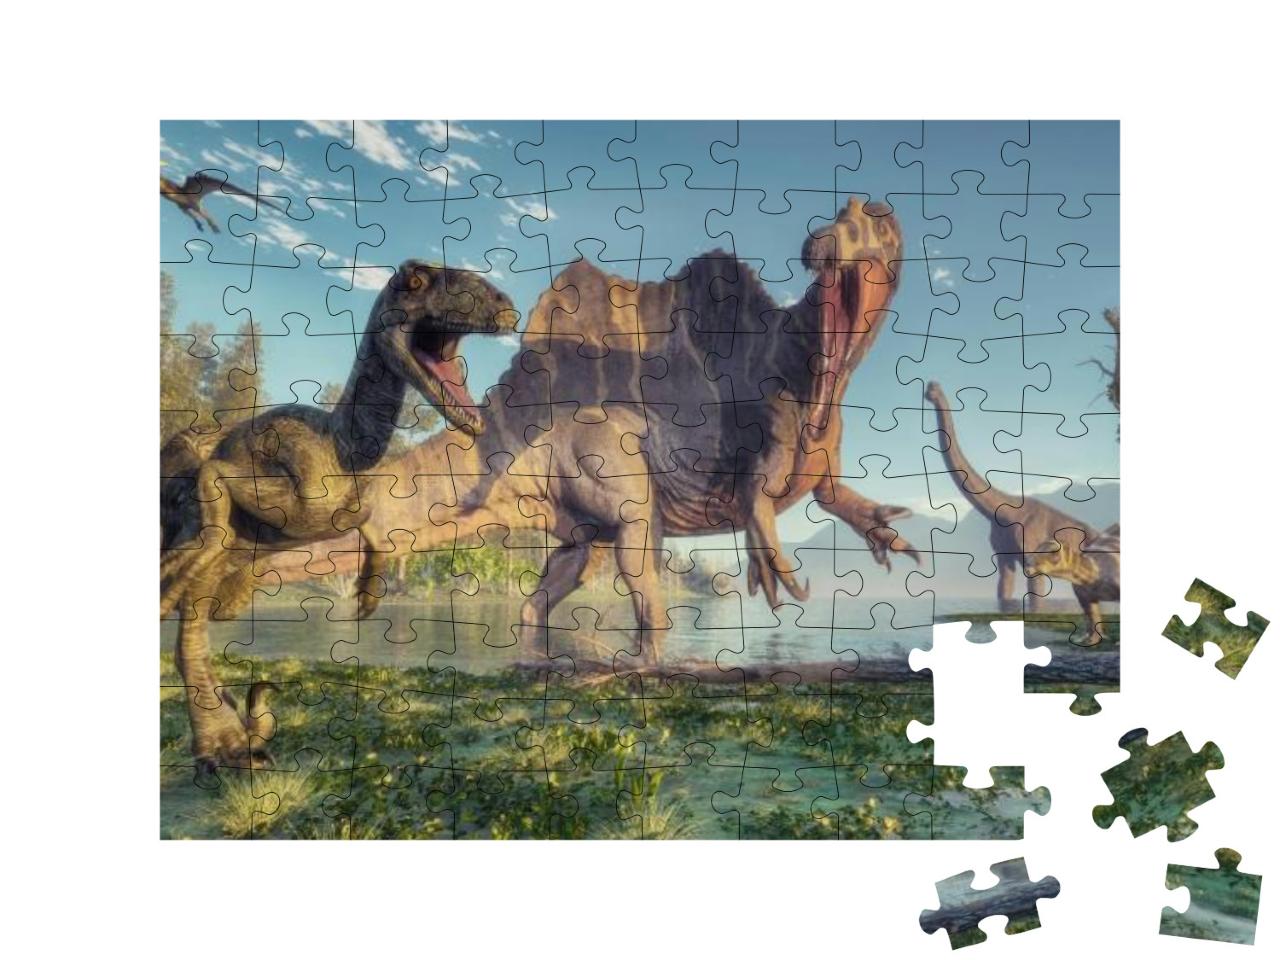 Spinosaurus & Deinonychus in the Jungle. This is a 3D Ren... Jigsaw Puzzle with 100 pieces